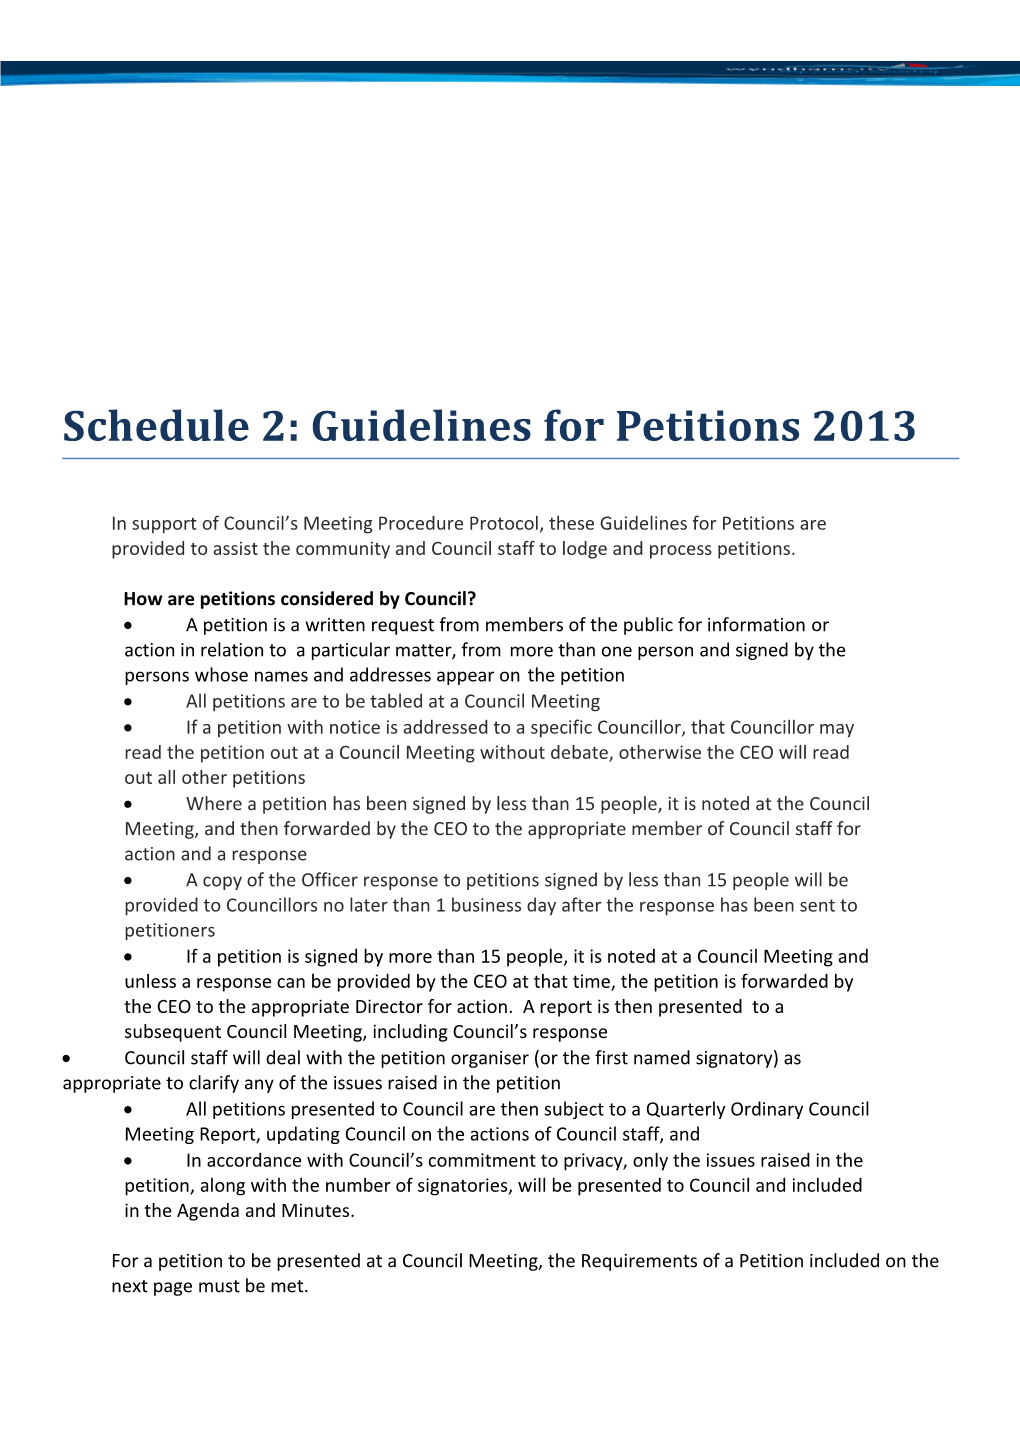 Schedule 2: Guidelines for Petitions 2013